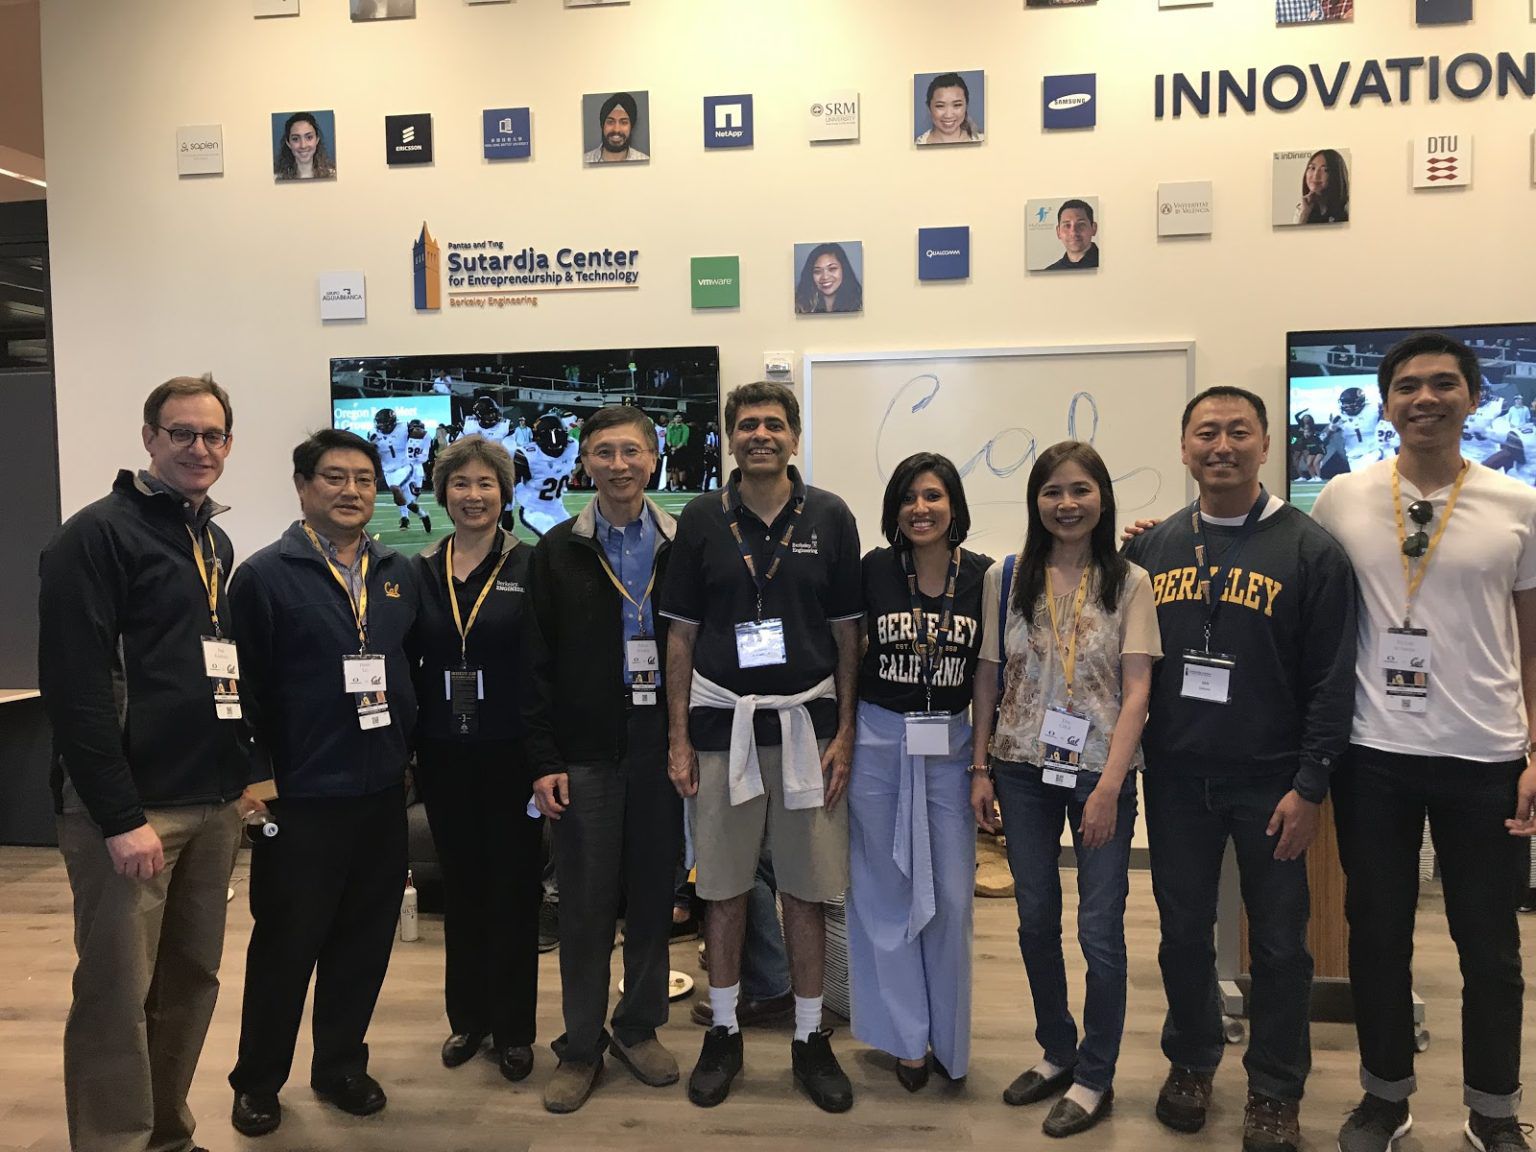 Dr. Pantas and Ting Sutardja at U.C. Berkeley Sutardja Center of Engineering & Technology (pictured 4th from the left and 3rd from right)